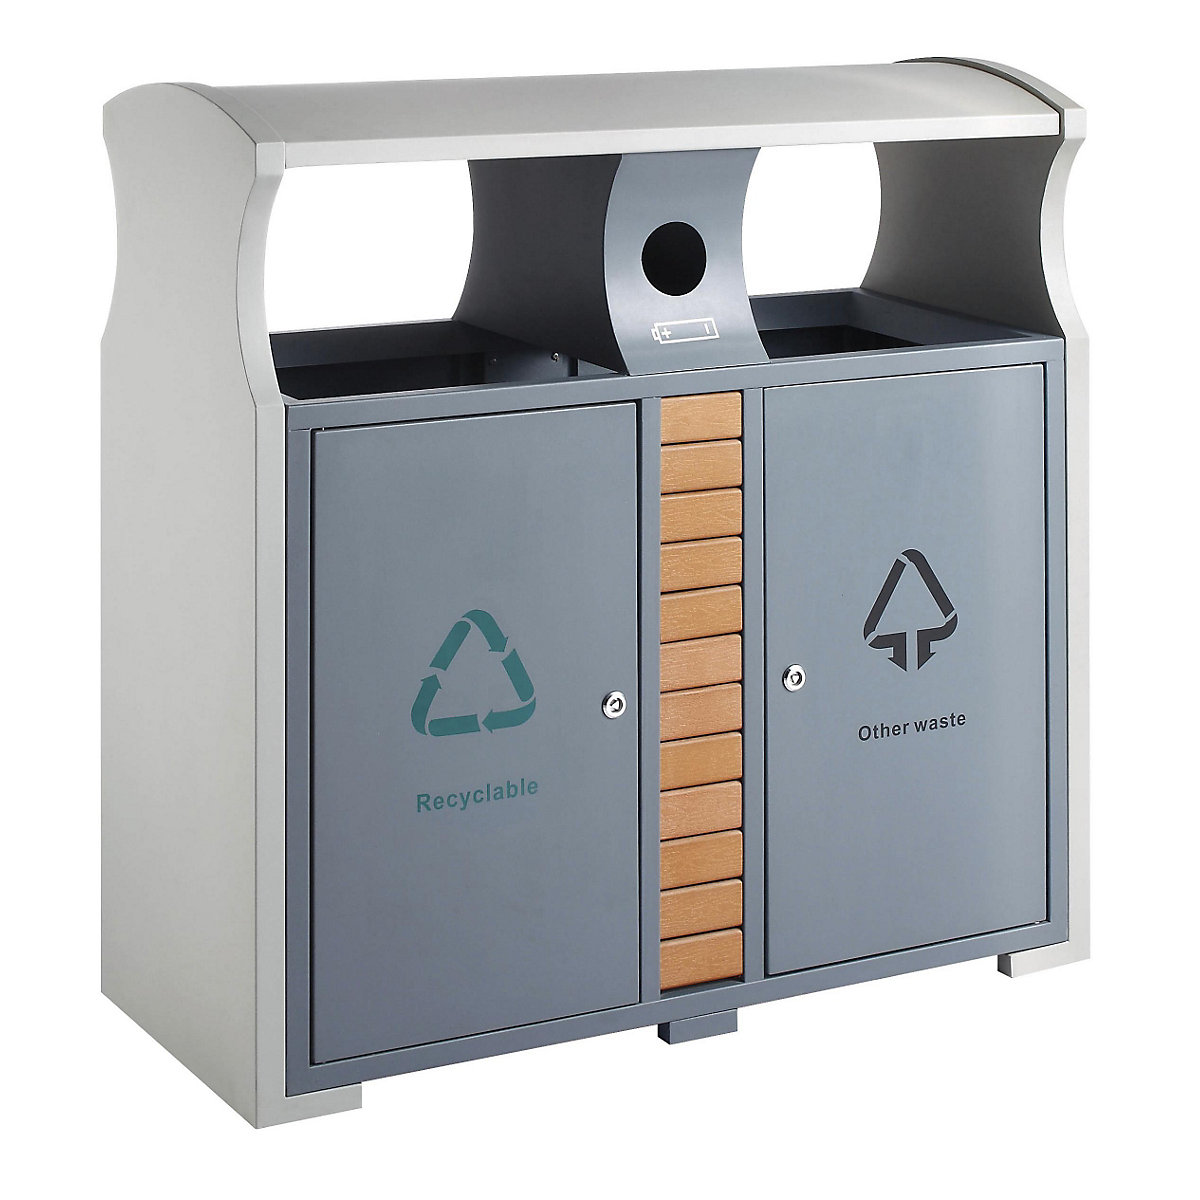 Recycling waste collector for outdoors